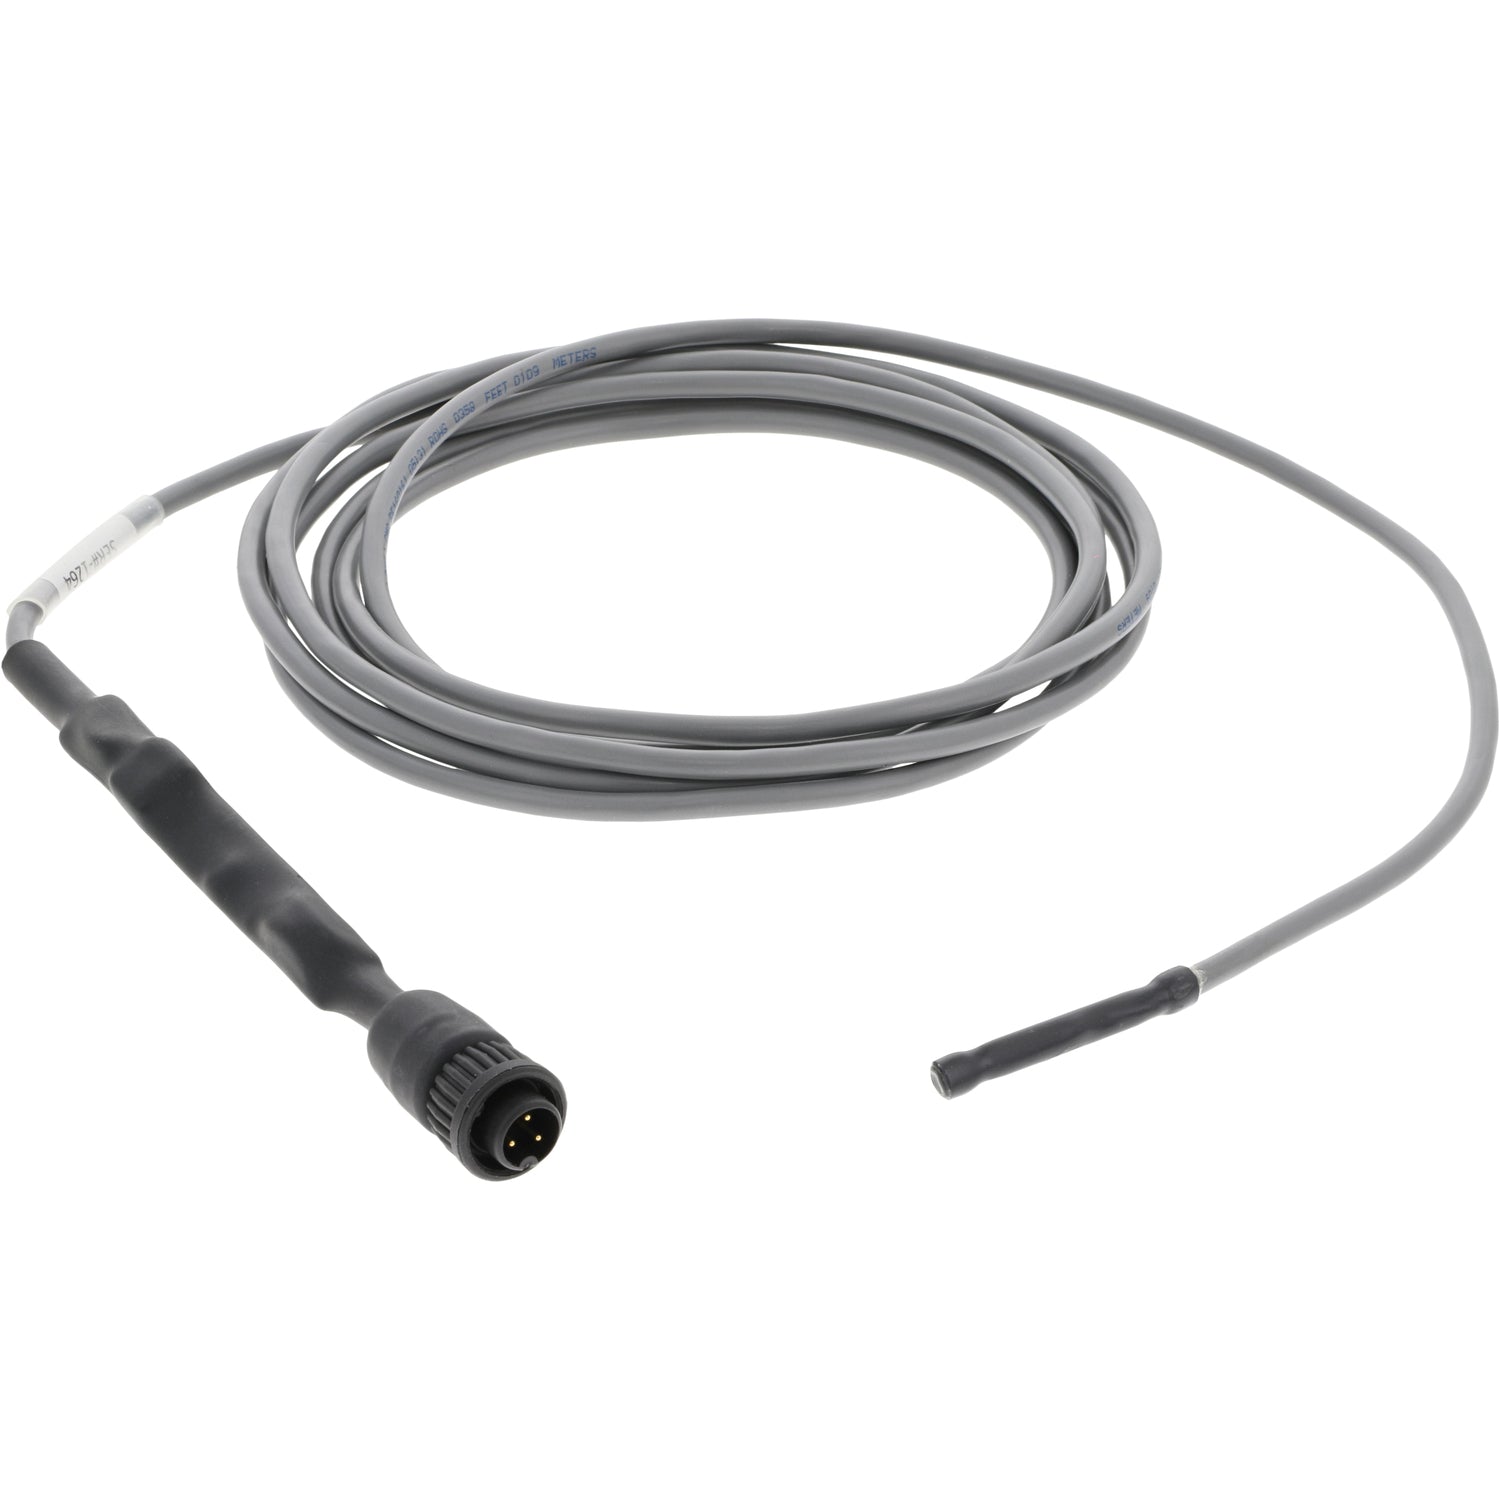 Grey coiled cable with a black plastic female electrical connection on one end and a black temperature sensor on the other. Shown on white background. 